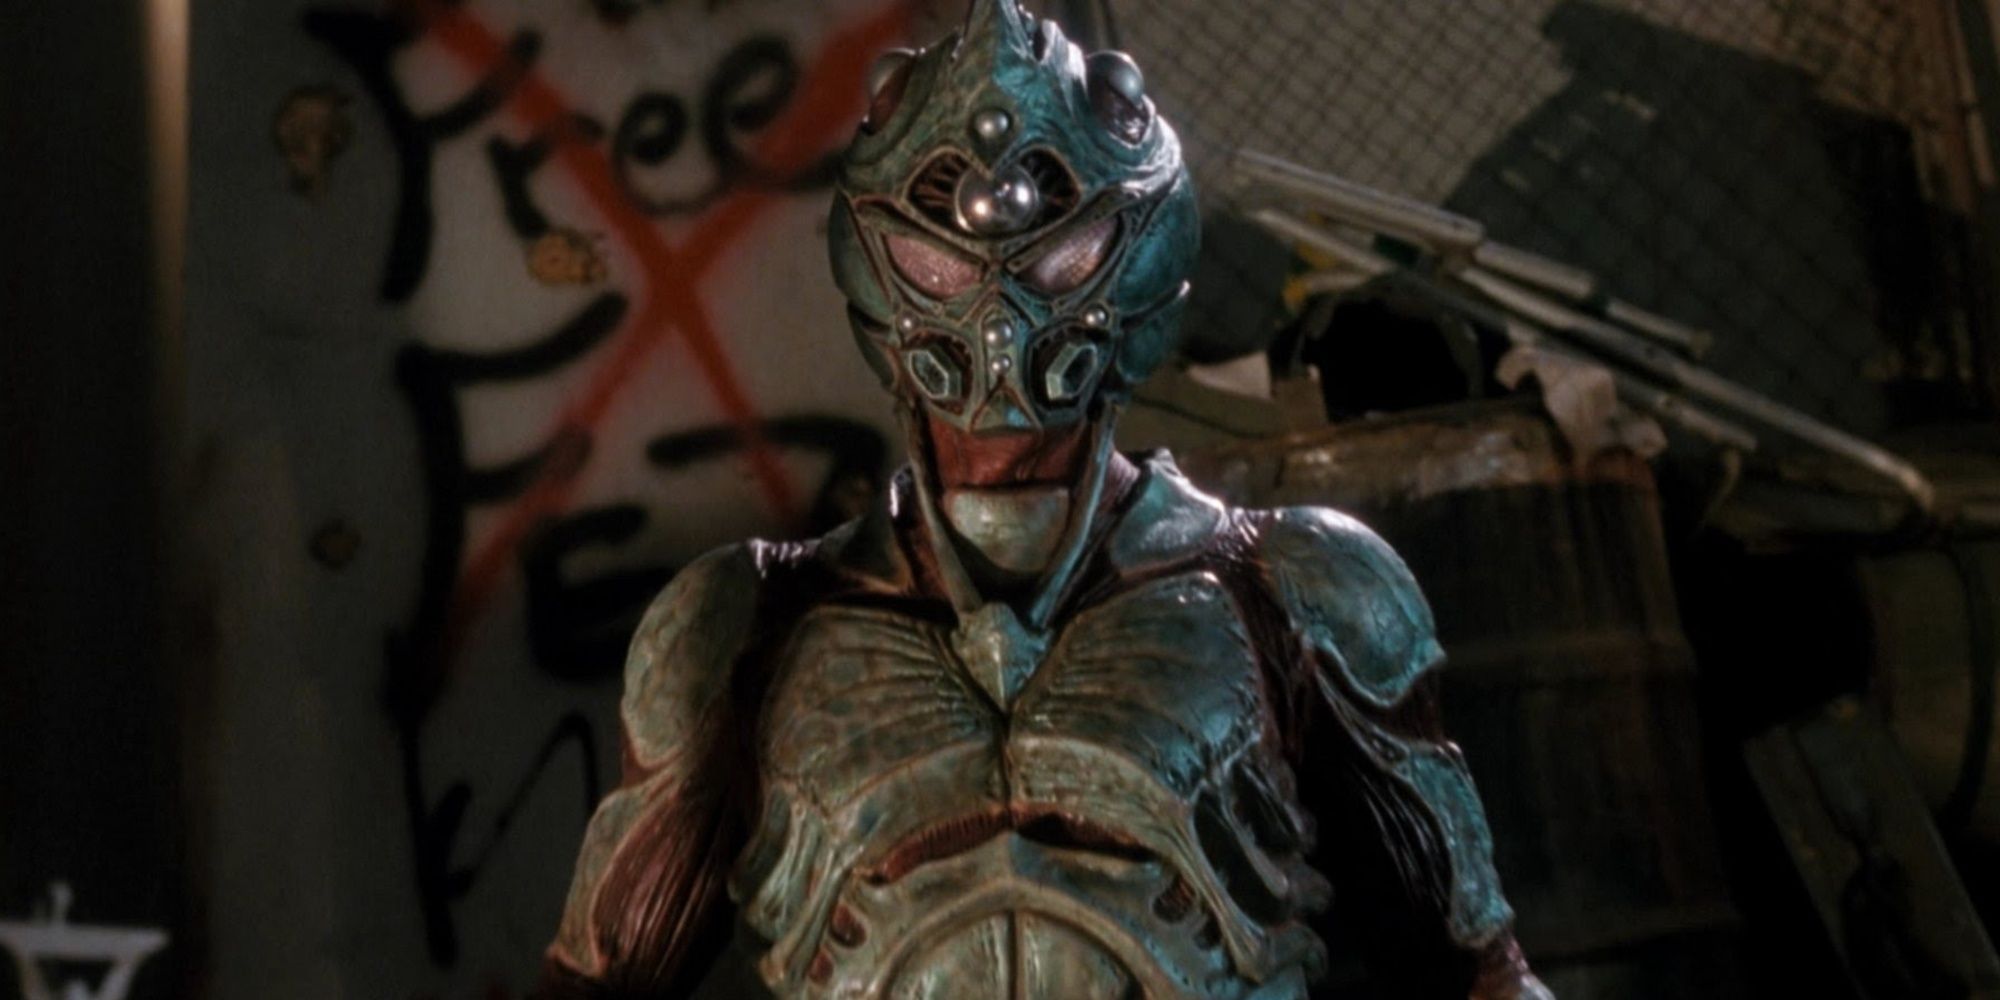 Jack Armstrong as Sean Barker/the Guyver Unit from The Guyver (1991)